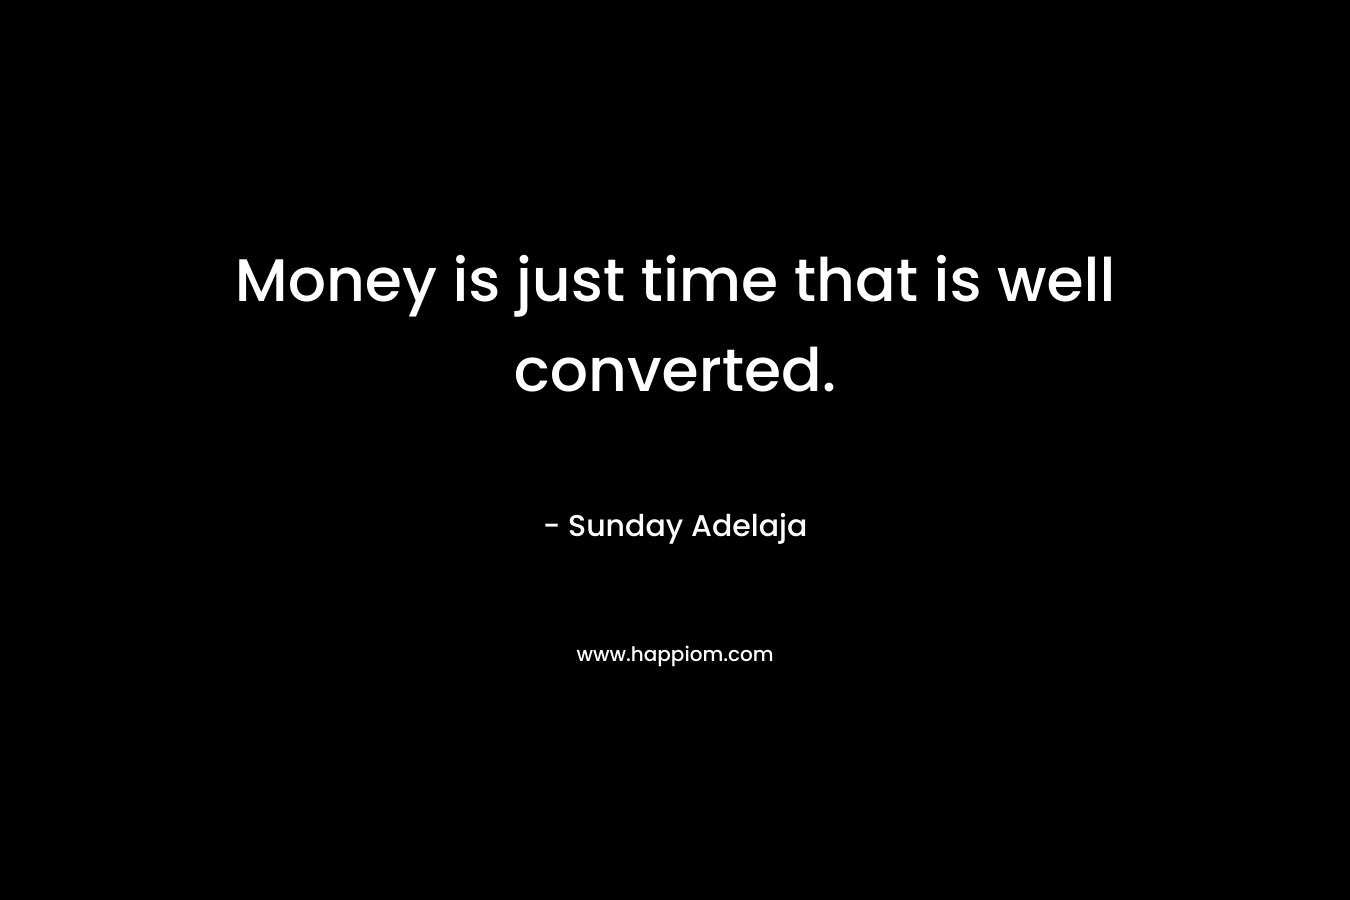 Money is just time that is well converted.